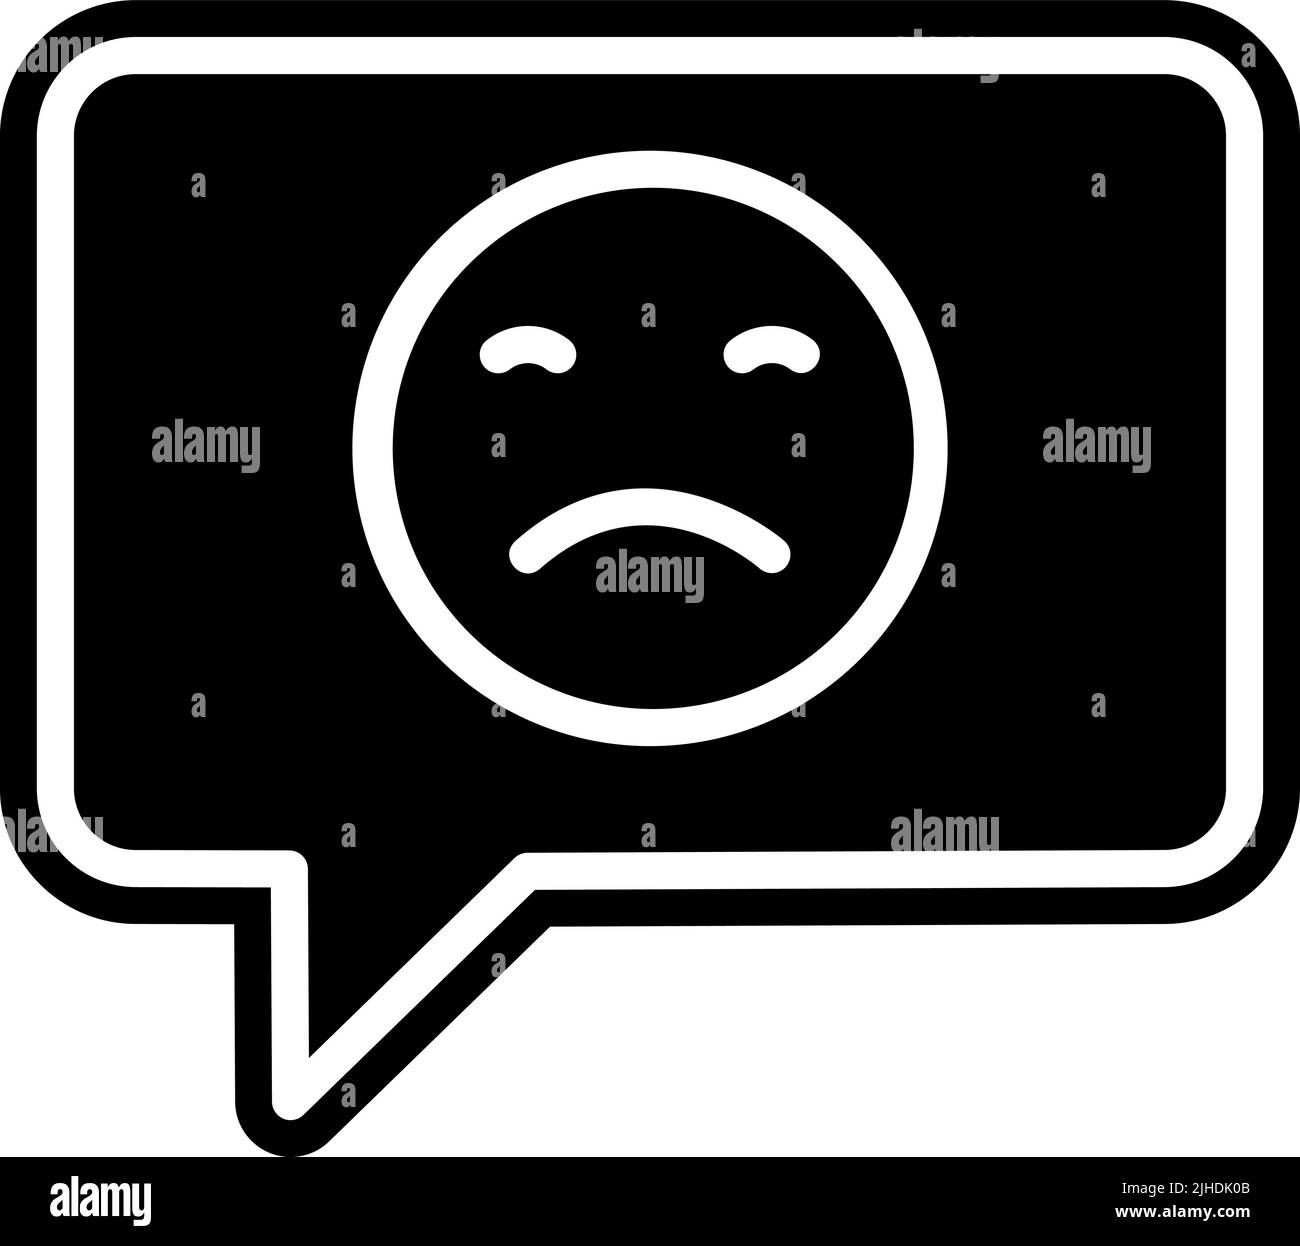 Neutral smiley Black and White Stock Photos & Images - Alamy